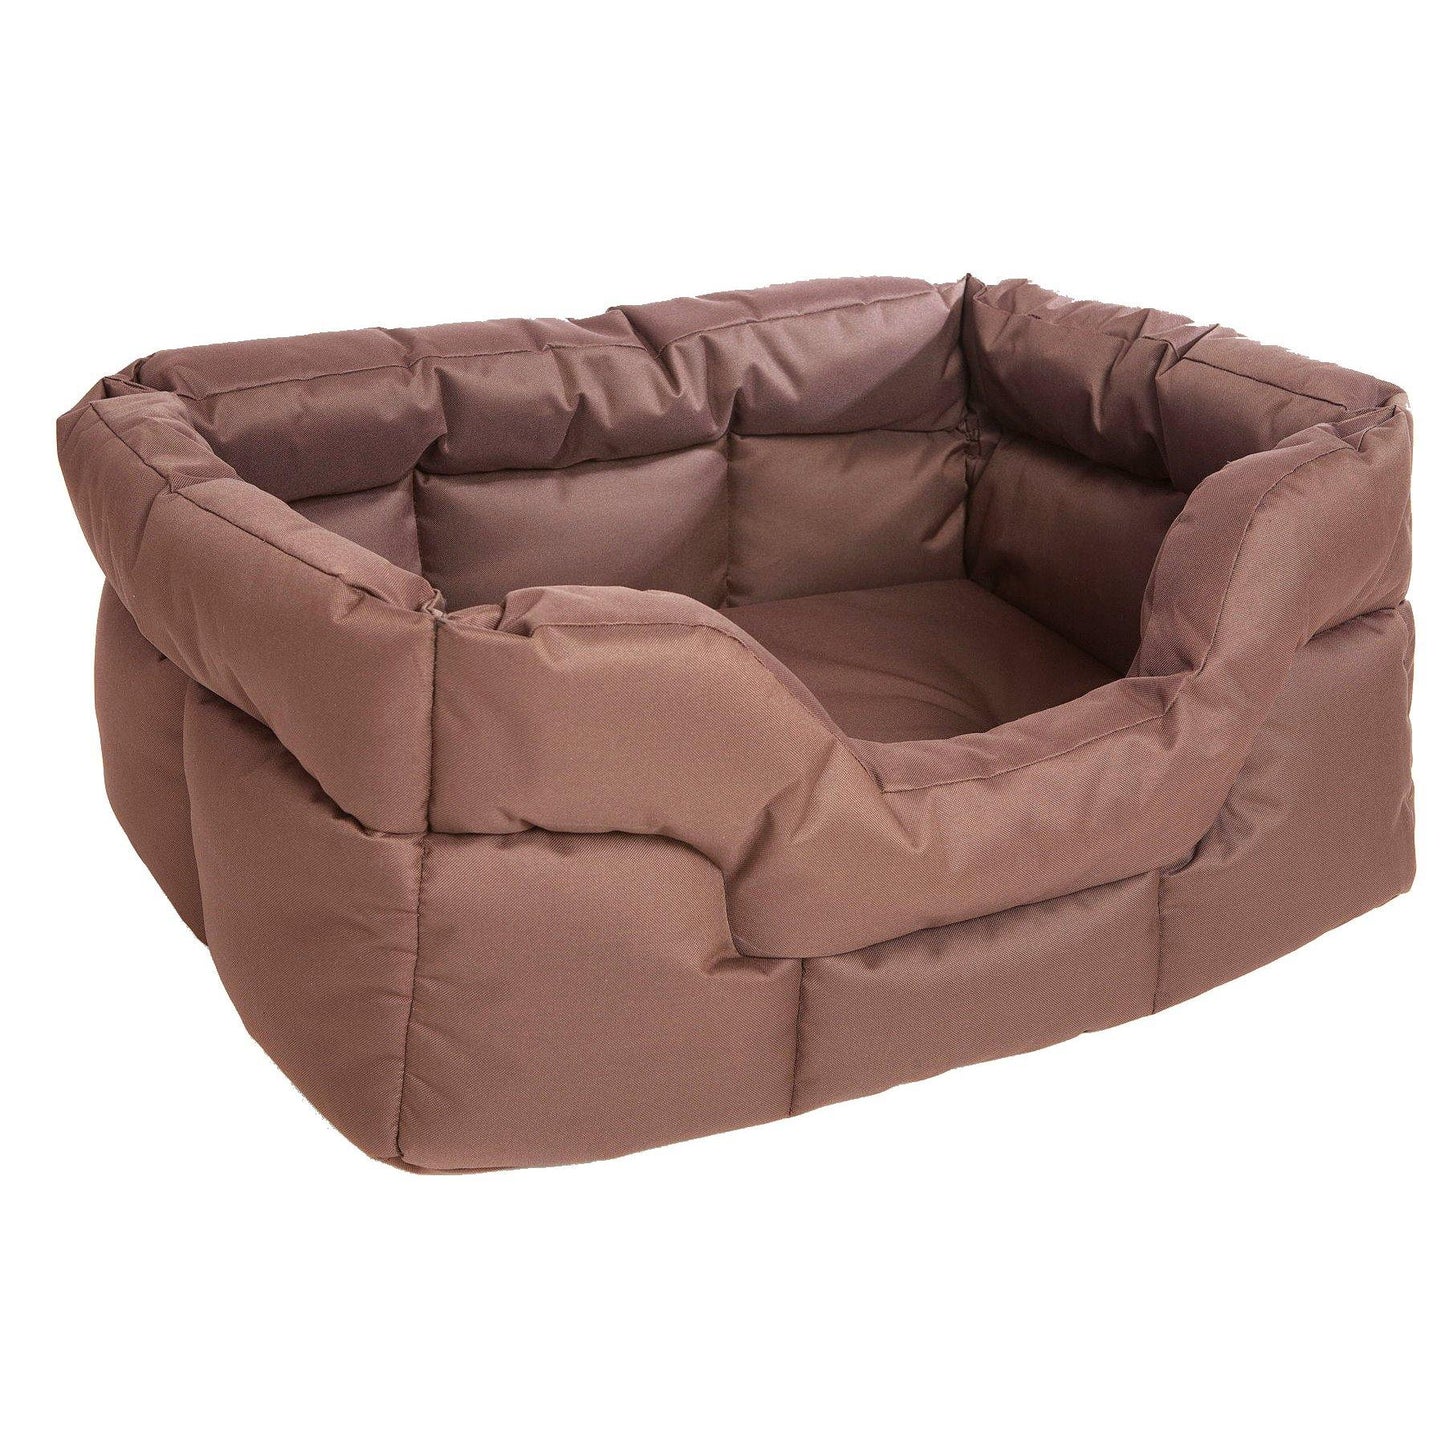 P&L Heavy Duty Rectangular Waterproof Dog Bed - Dog Bed Outlet